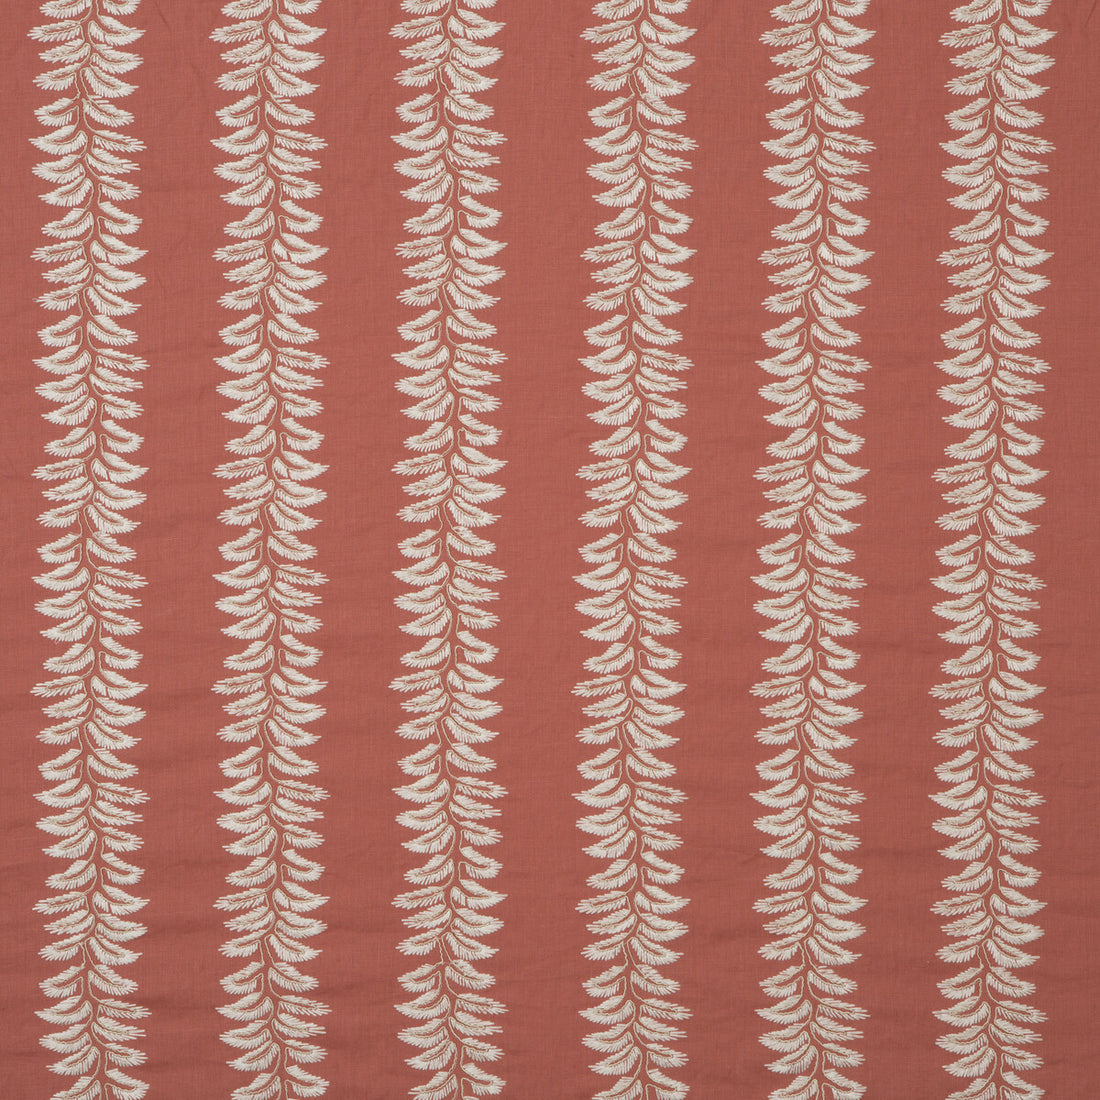 Bradbourne fabric in coral color - pattern BF10533.310.0 - by G P &amp; J Baker in the Langdale collection